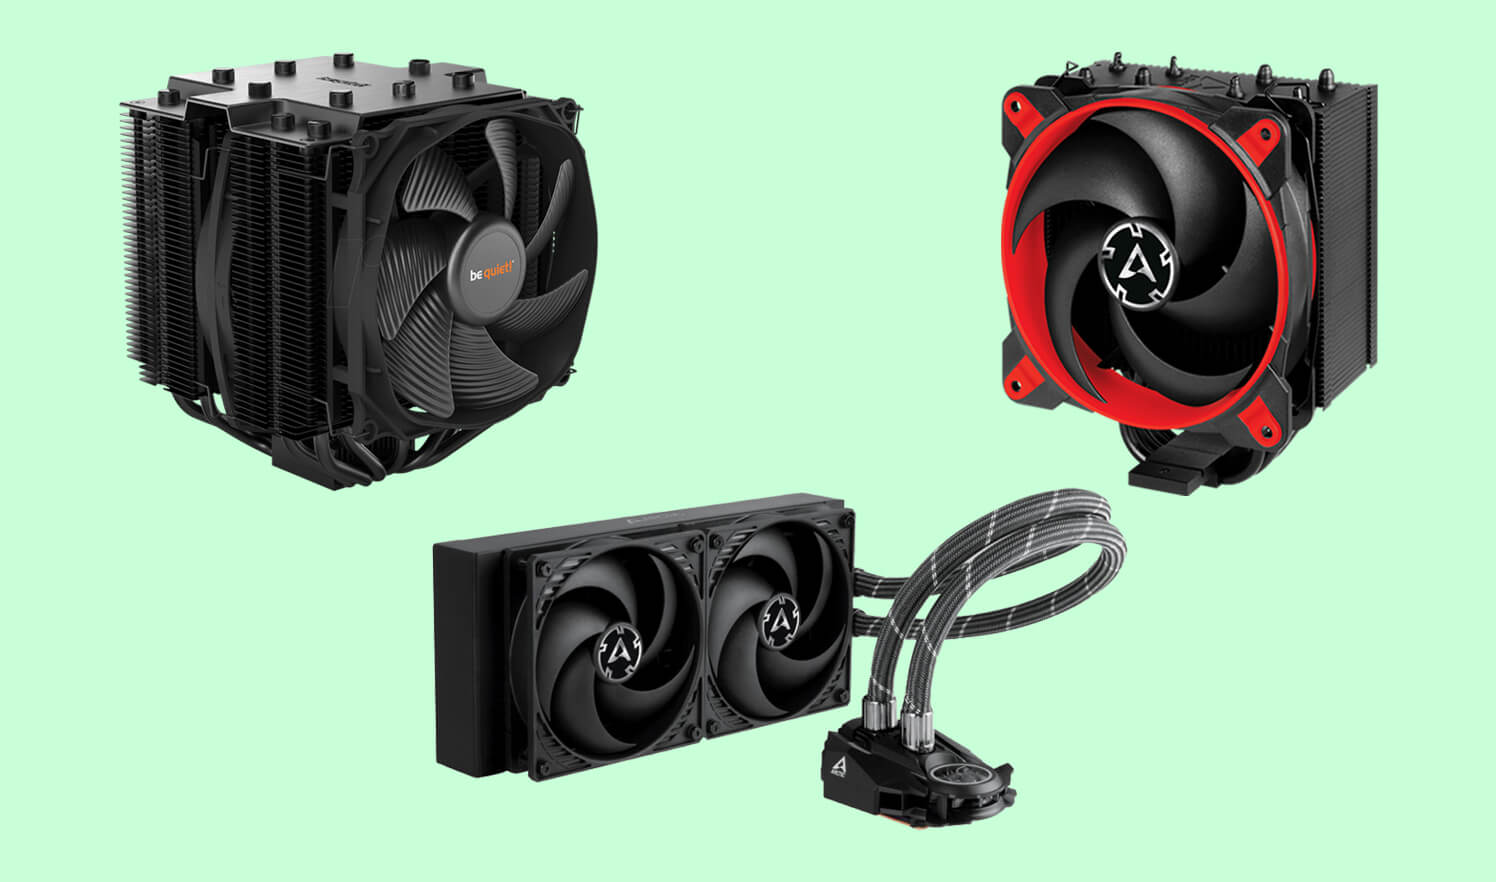 The Best CPU coolers for AMD Ryzen 5 5600X